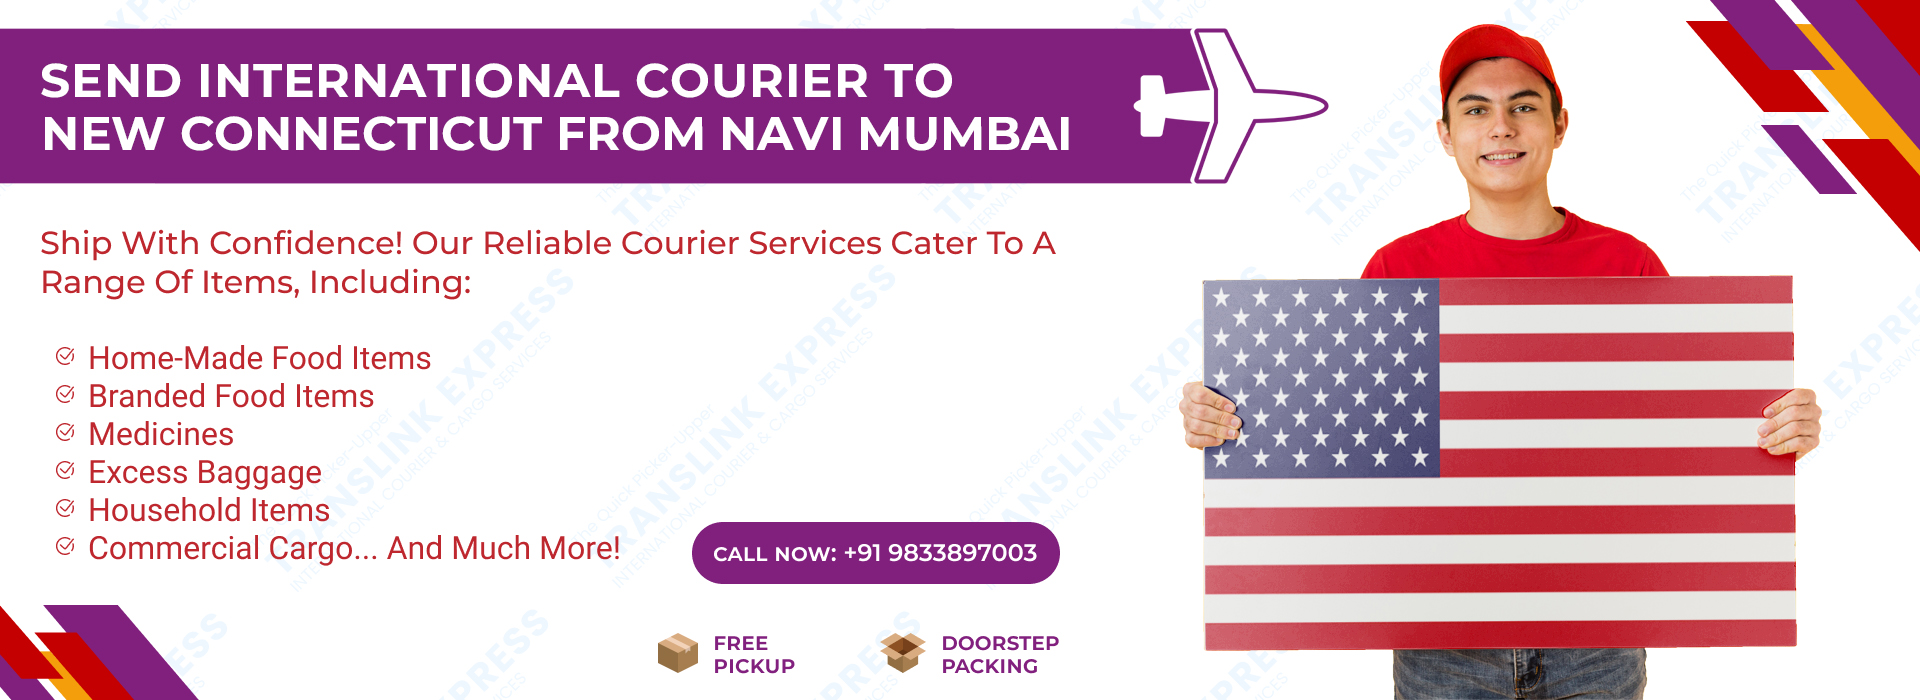 Courier to New Connecticut From Navi Mumbai